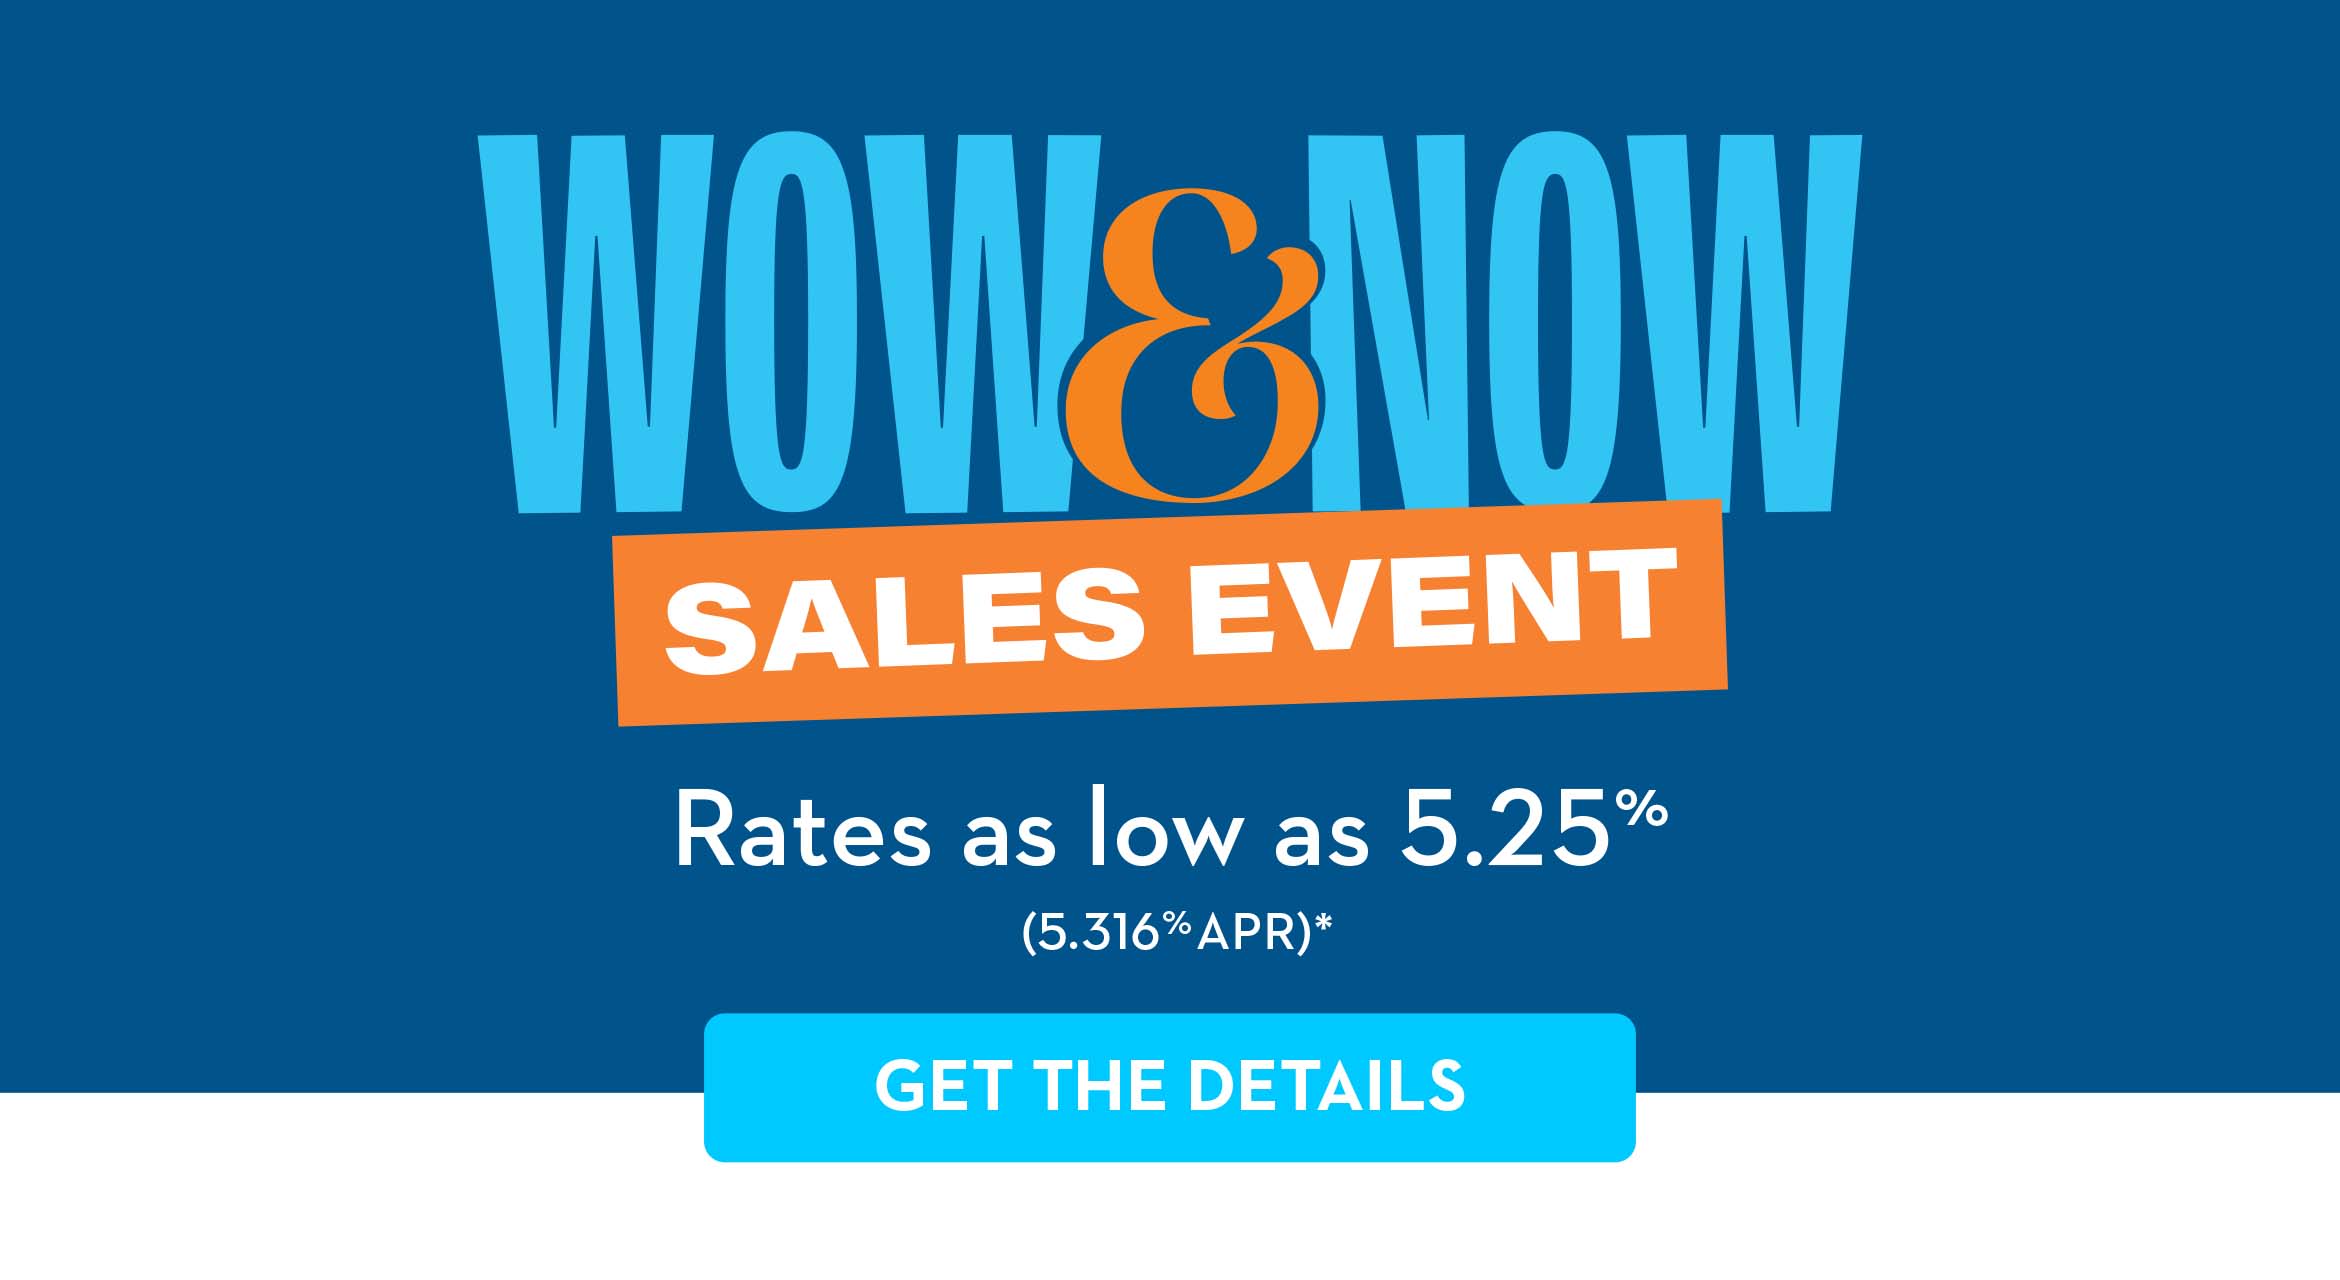 WOW & NOW SALES EVENT Rates as low as 5.25% (5.316% APR)** GET THE DETAILS